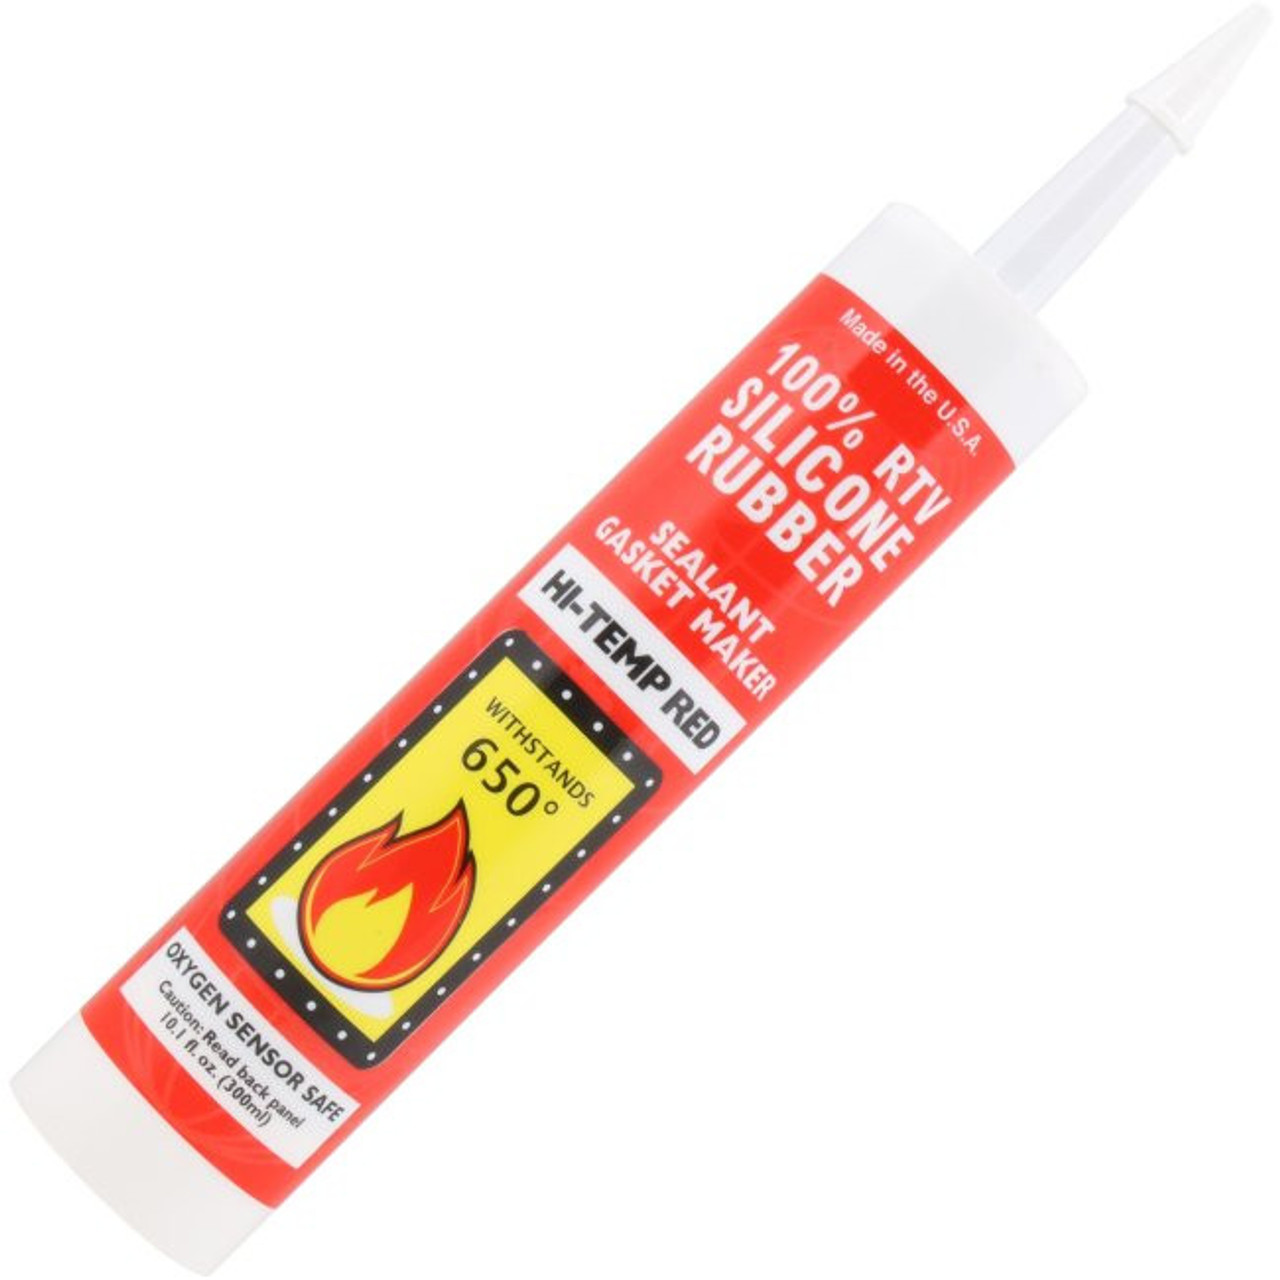 1 RTV Red Silicone Gasket Maker High-Temp Instant Sealant 3 oz. for AUTO  Boat RV